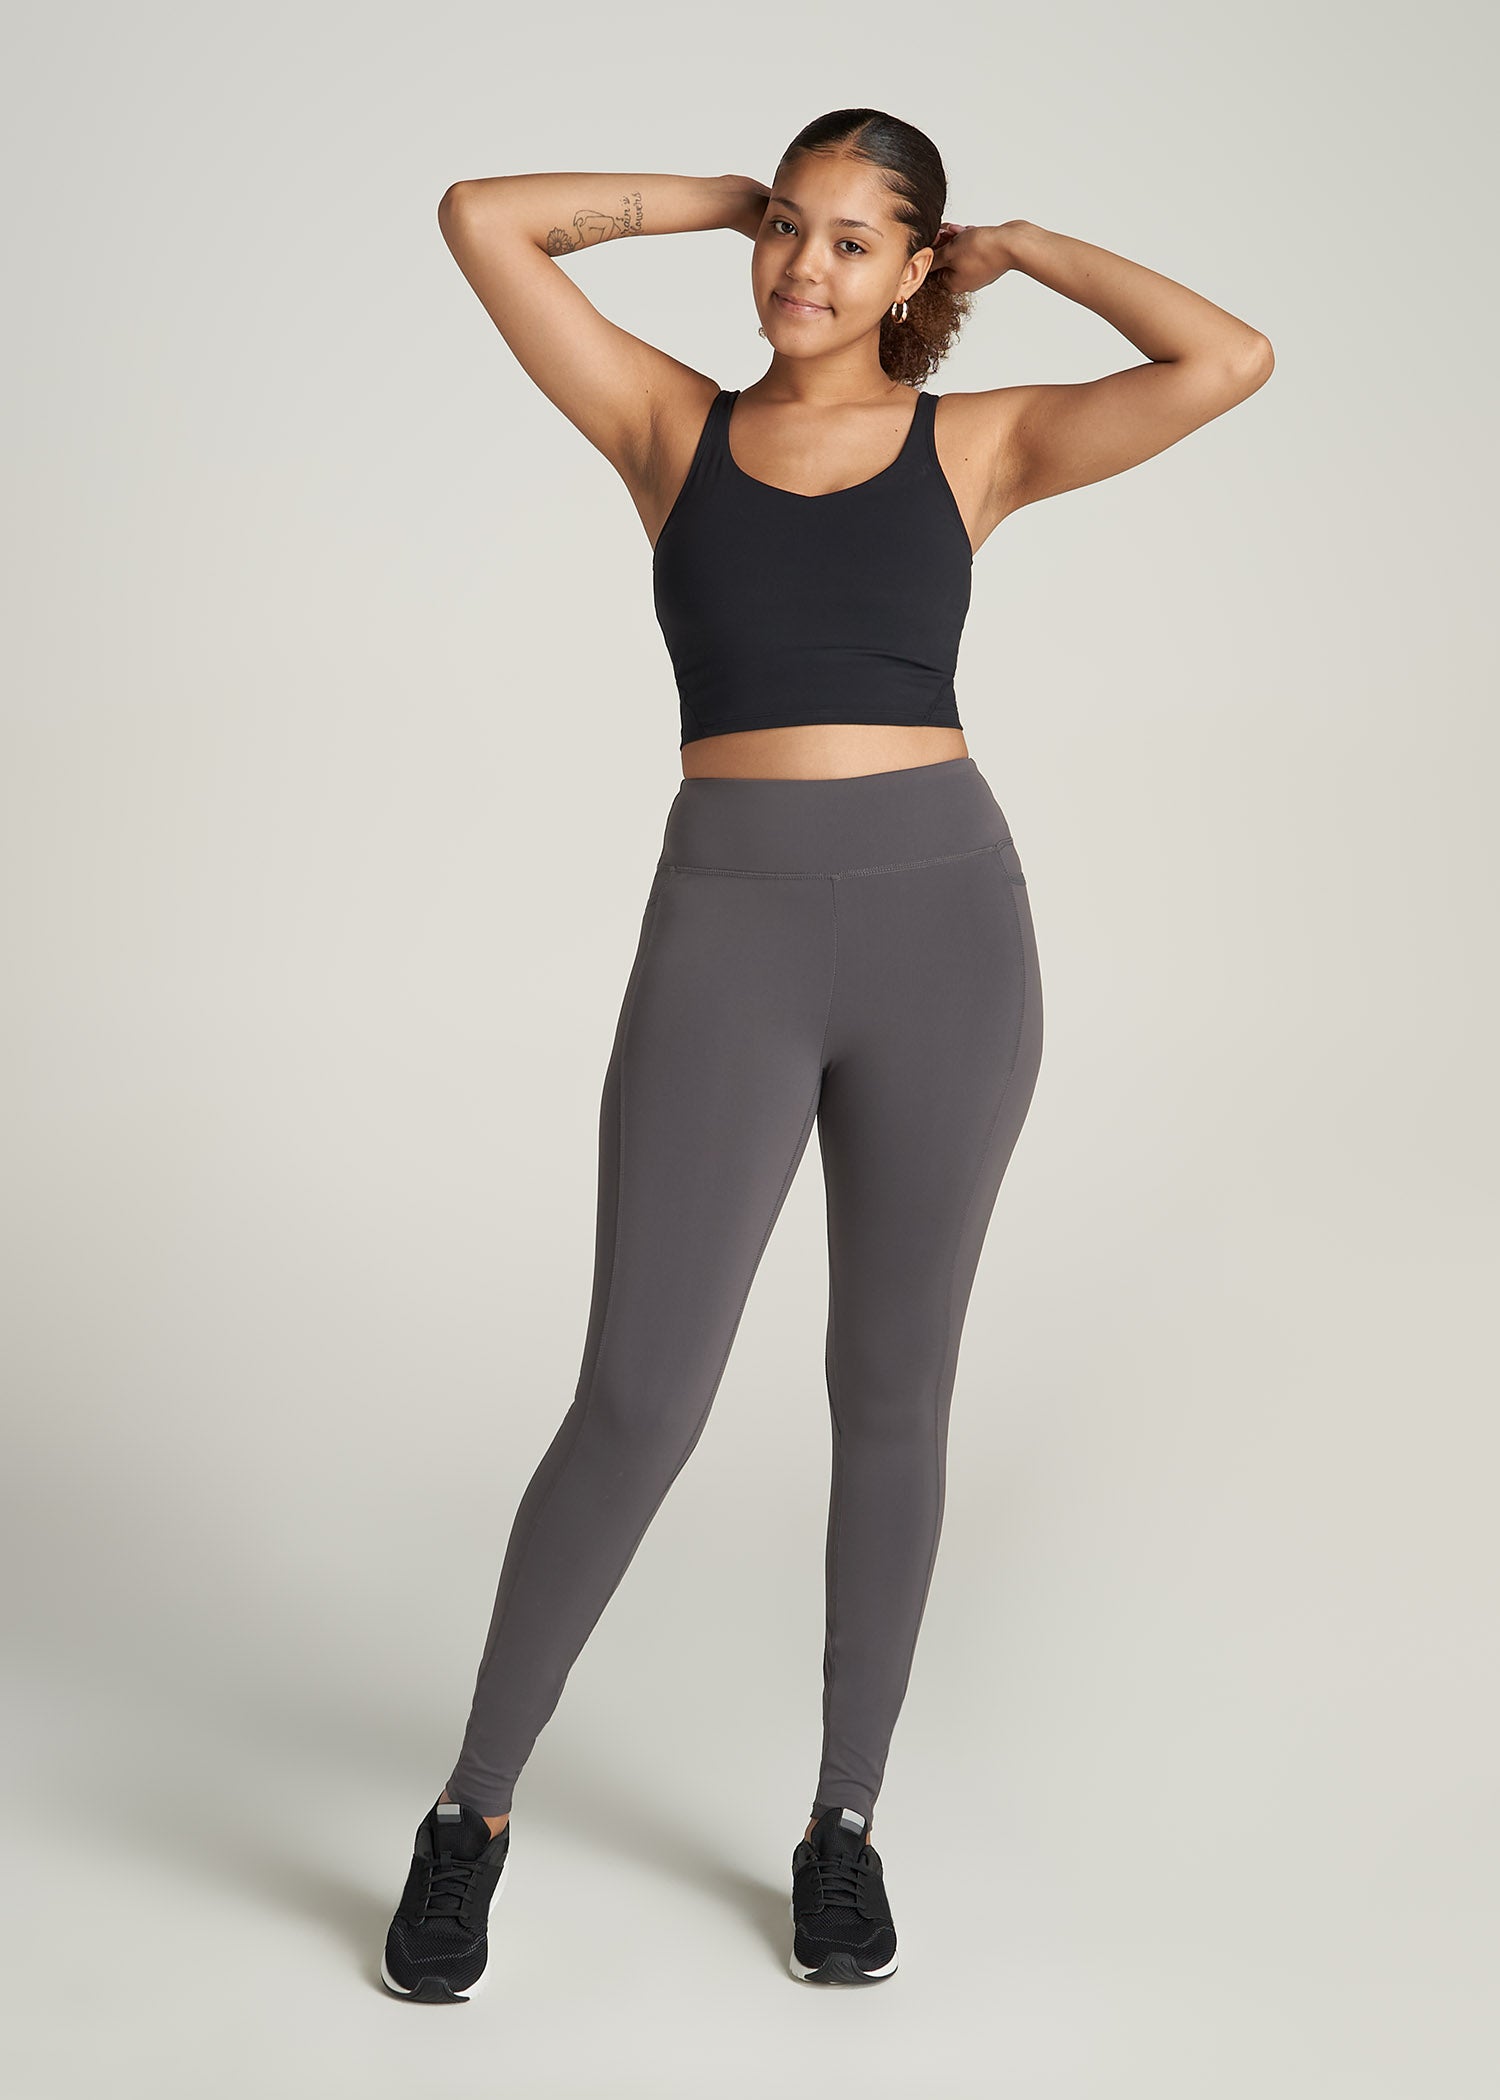 Womens Abdominal Compression Active Yoga Leggings Tall Length With Pockets  For Fitness And Comfort From Dieshucai, $13.3 | DHgate.Com